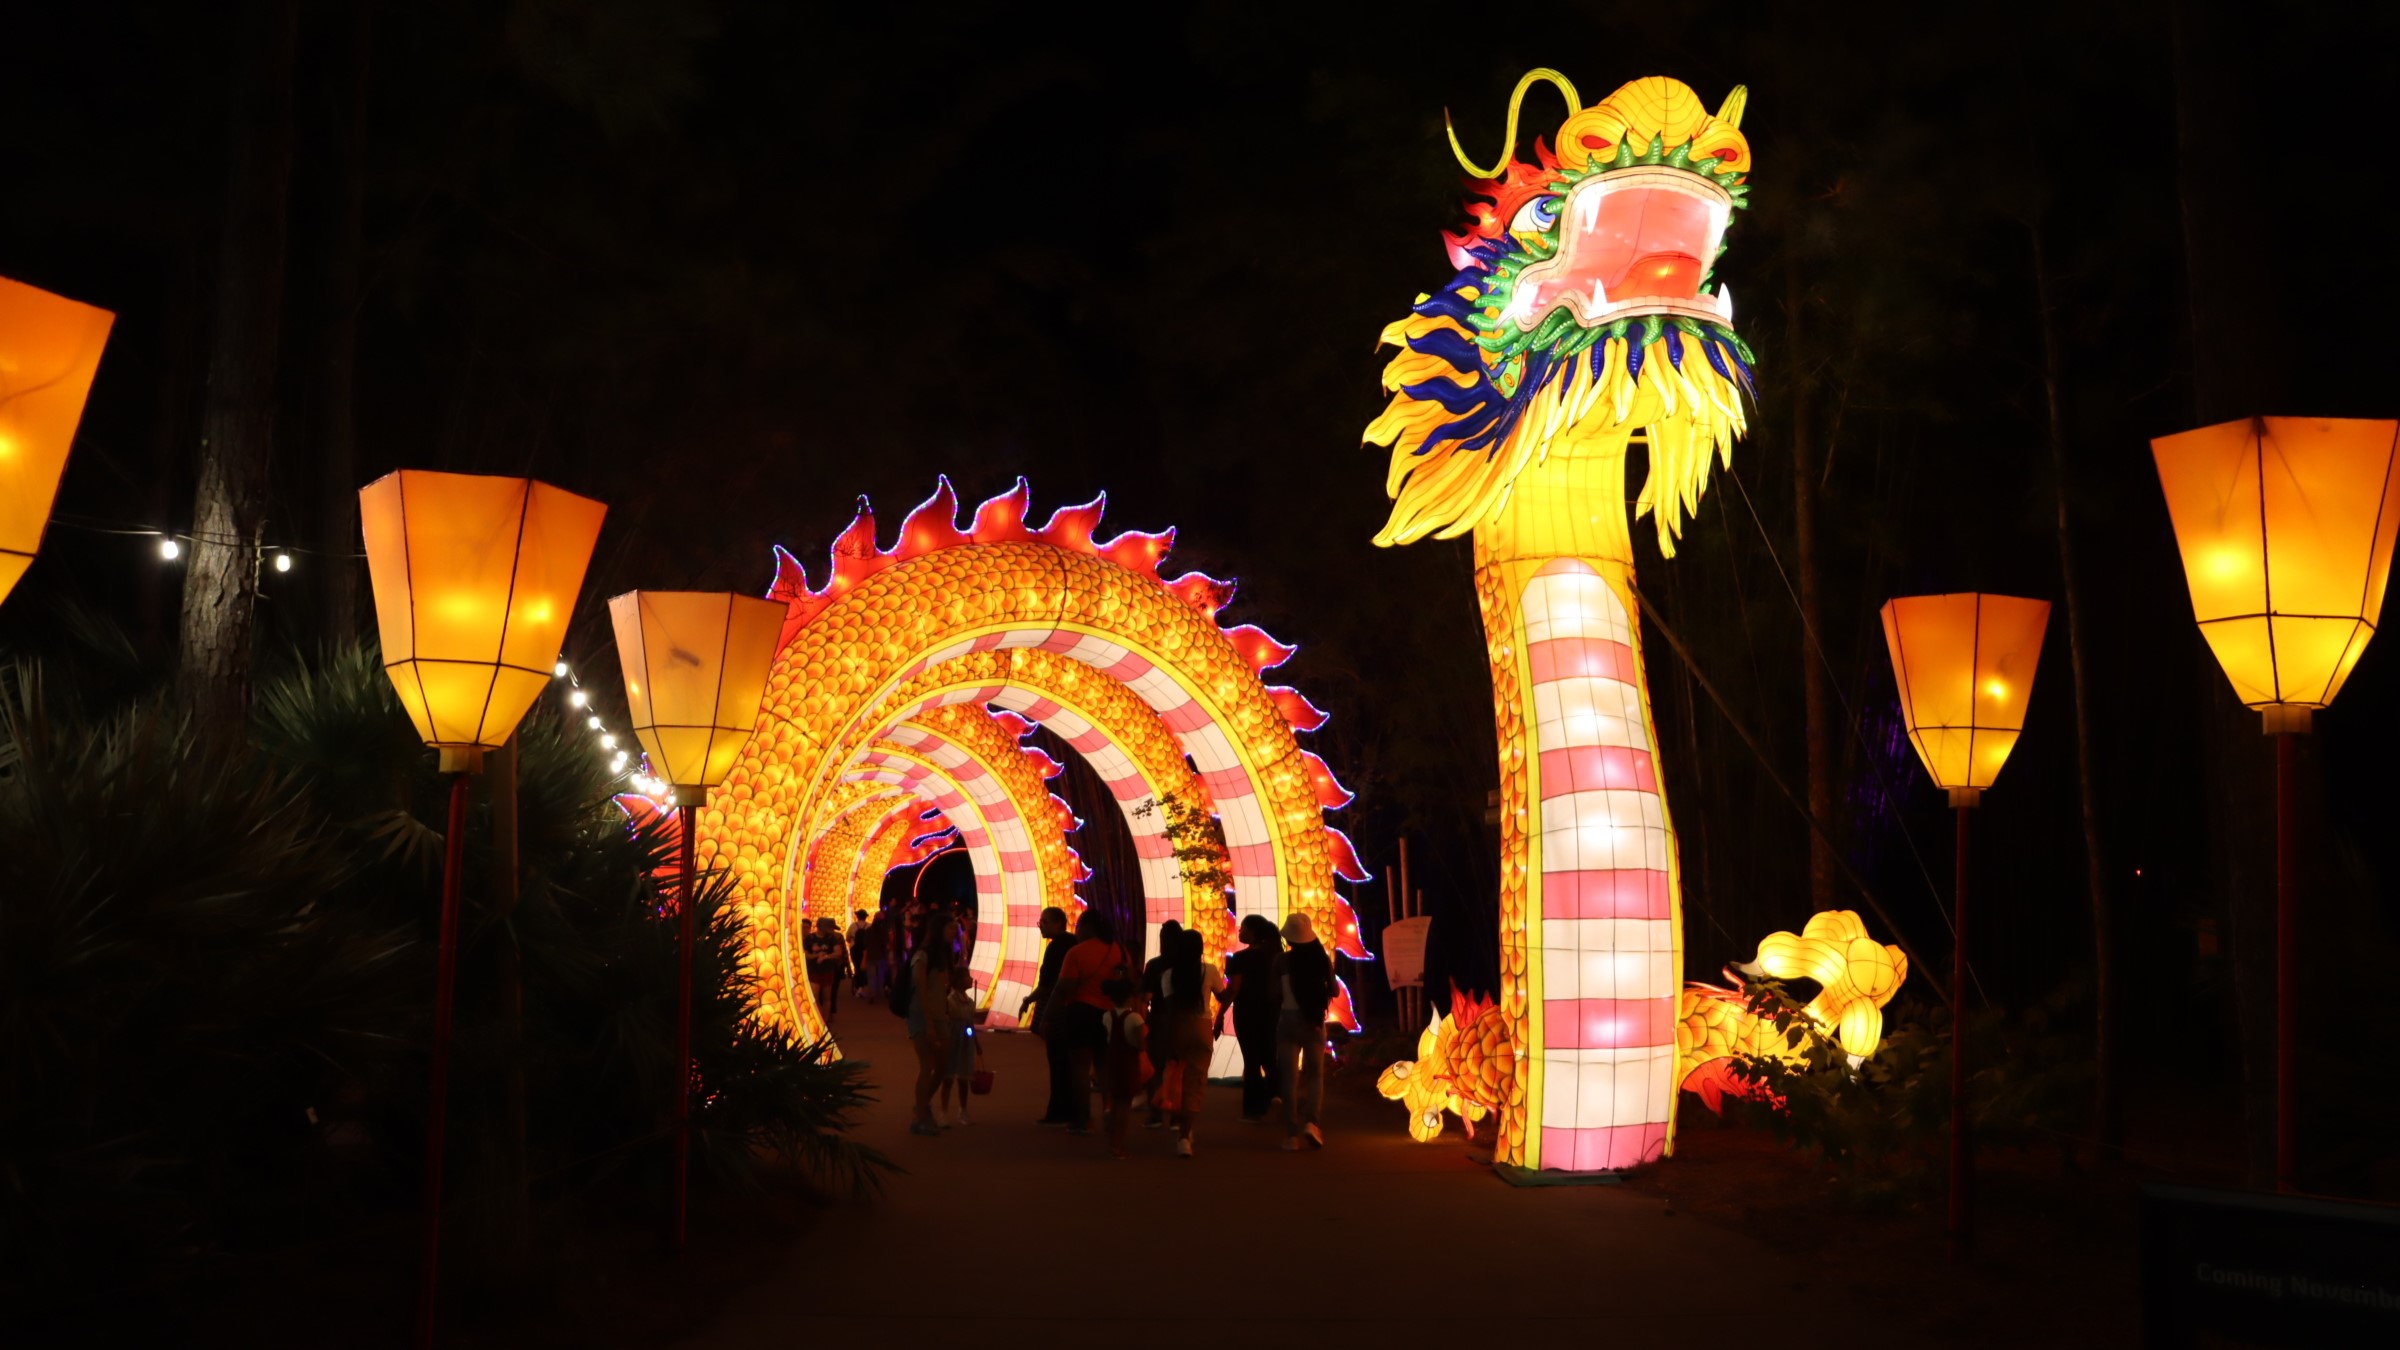 This long, curving dragon lantern is part of the Colors of the Wild display at the Jacksonville Zoo and Gardens. | Jacksonville Zoo and Gardens